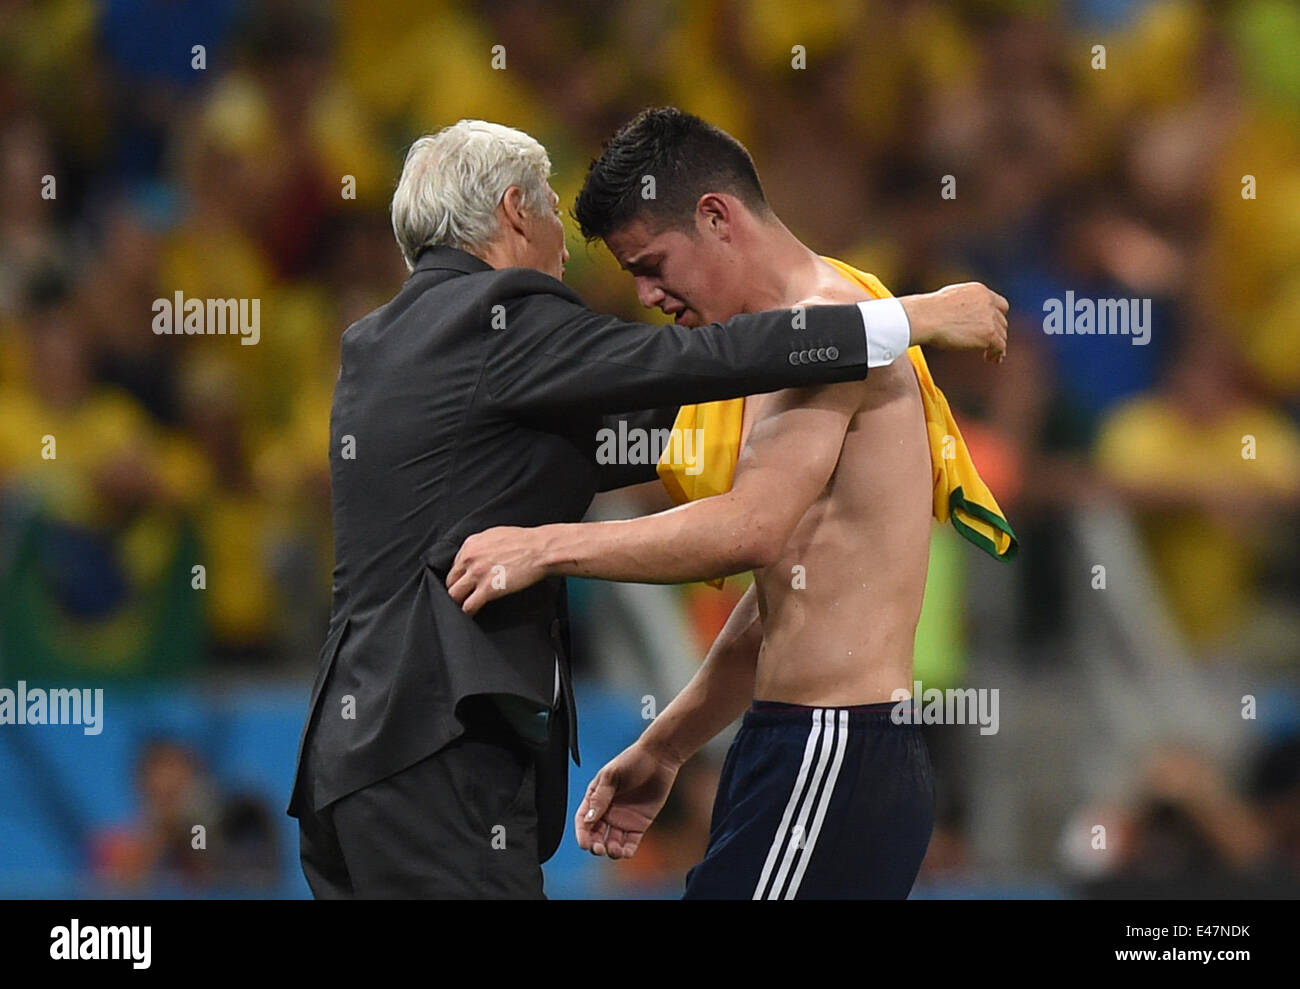 Fortaleza, Brazil. 04th July, 2014. Head coach Jose Pekerman (L) of Colombia hugs his player James Rodriguez after the FIFA World Cup 2014 quarter final match soccer between Brazil and Colombia at the Estadio Castelao in Fortaleza, Brazil, 04 July 2014. Photo: Marius Becker/dpa/Alamy Live News Stock Photo